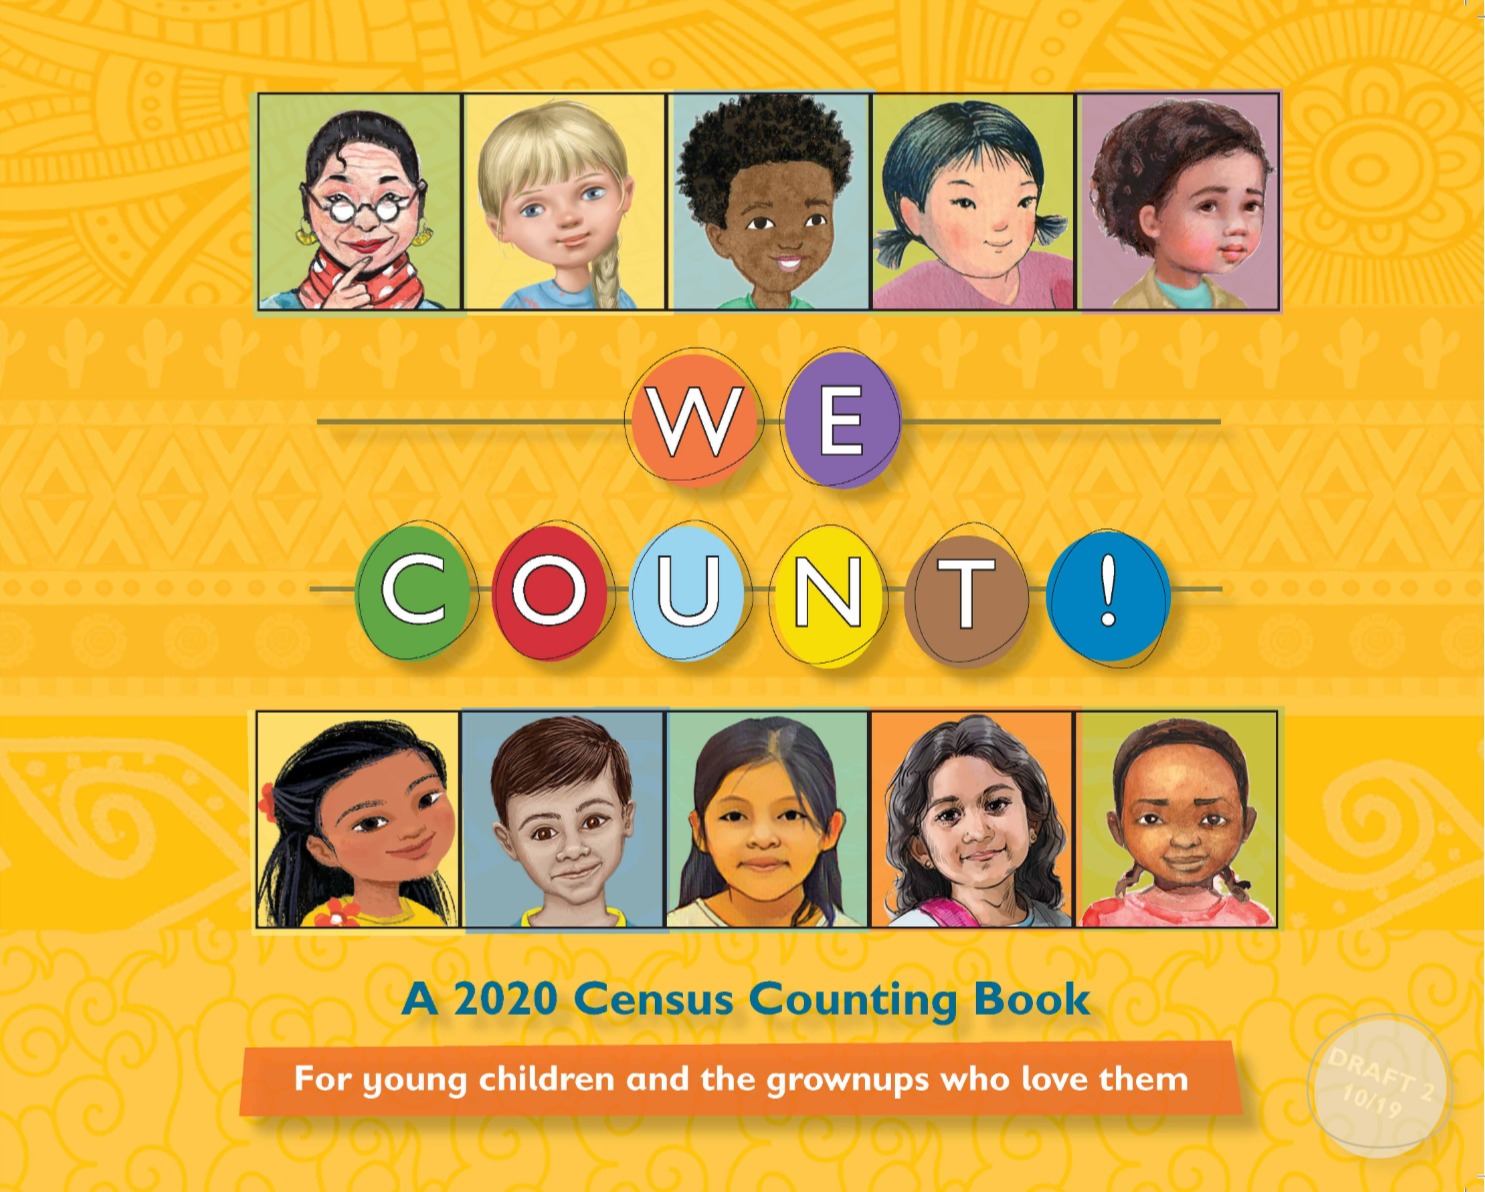 We count! : a 2020 Census counting book for young children and the grownups who love them